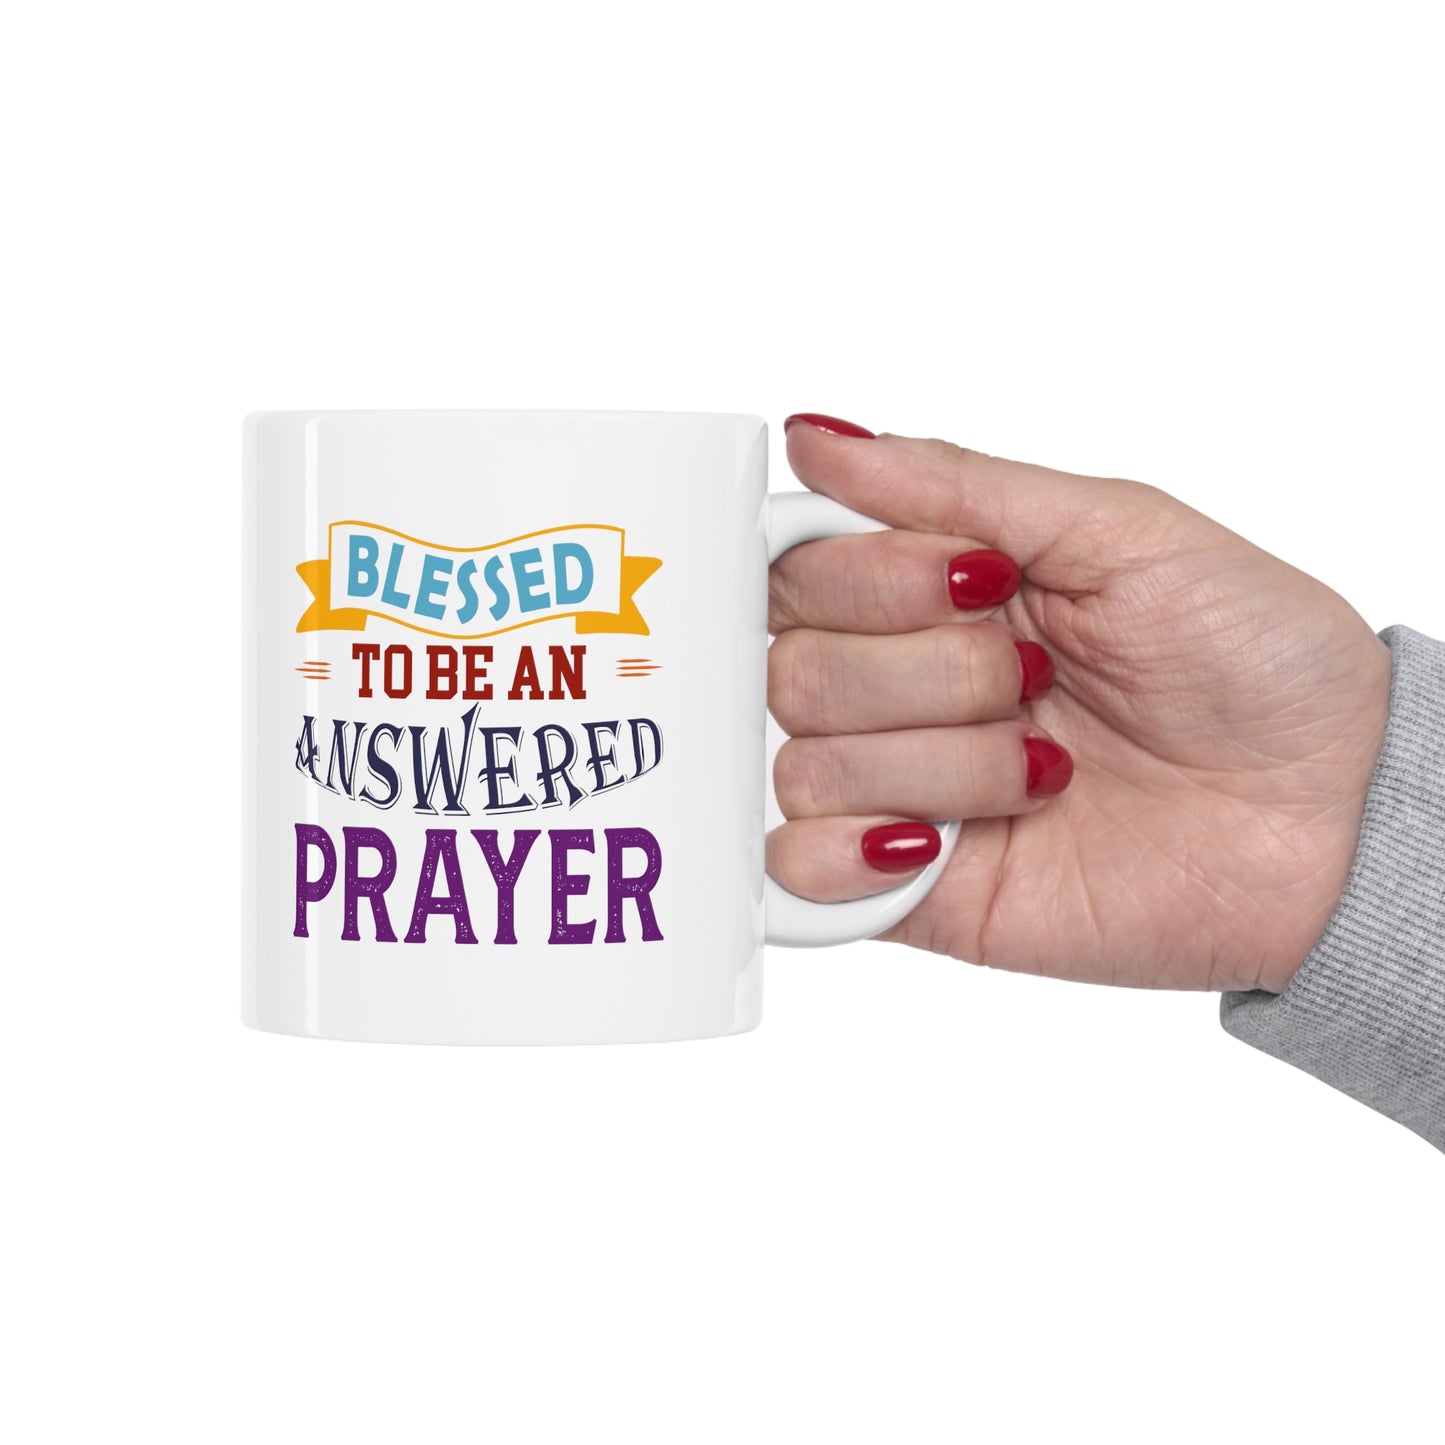 Blessed To Be An Answered Prayer  White Ceramic Mug 11oz (double sided printing) Printify